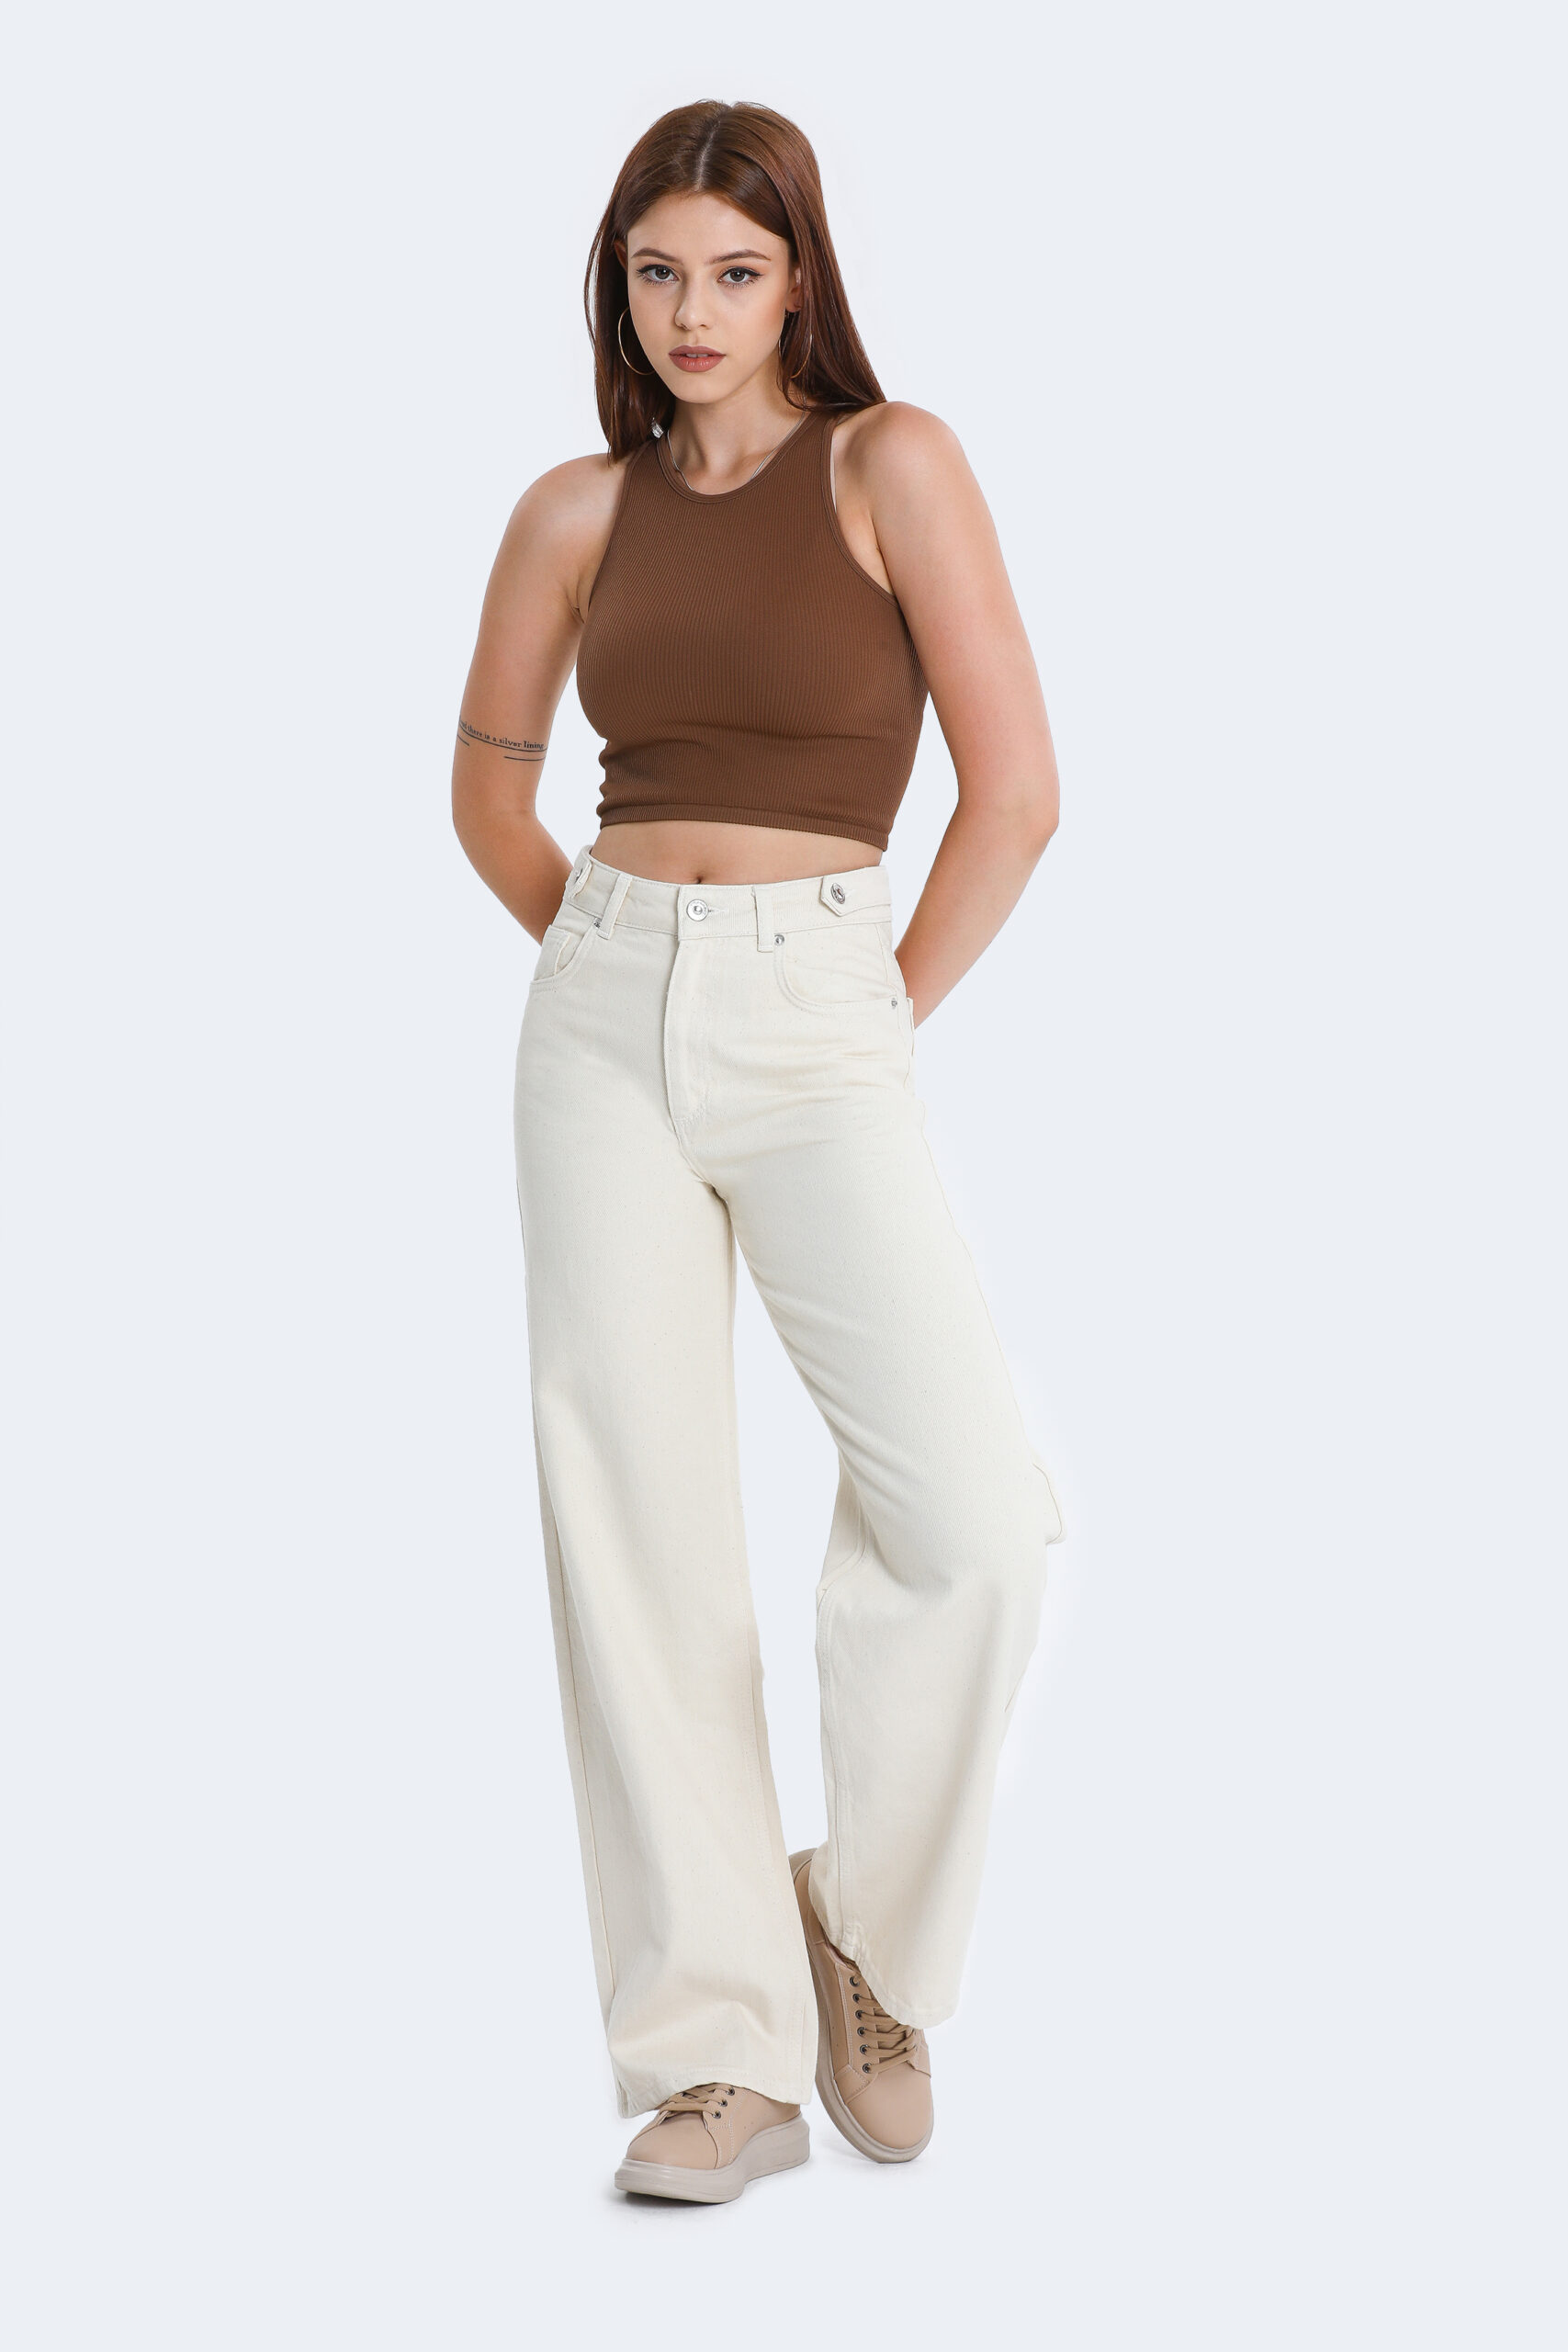 Shop White High Waisted Wide Leg Jeans: A Perfect Addition to Your Wardrobe